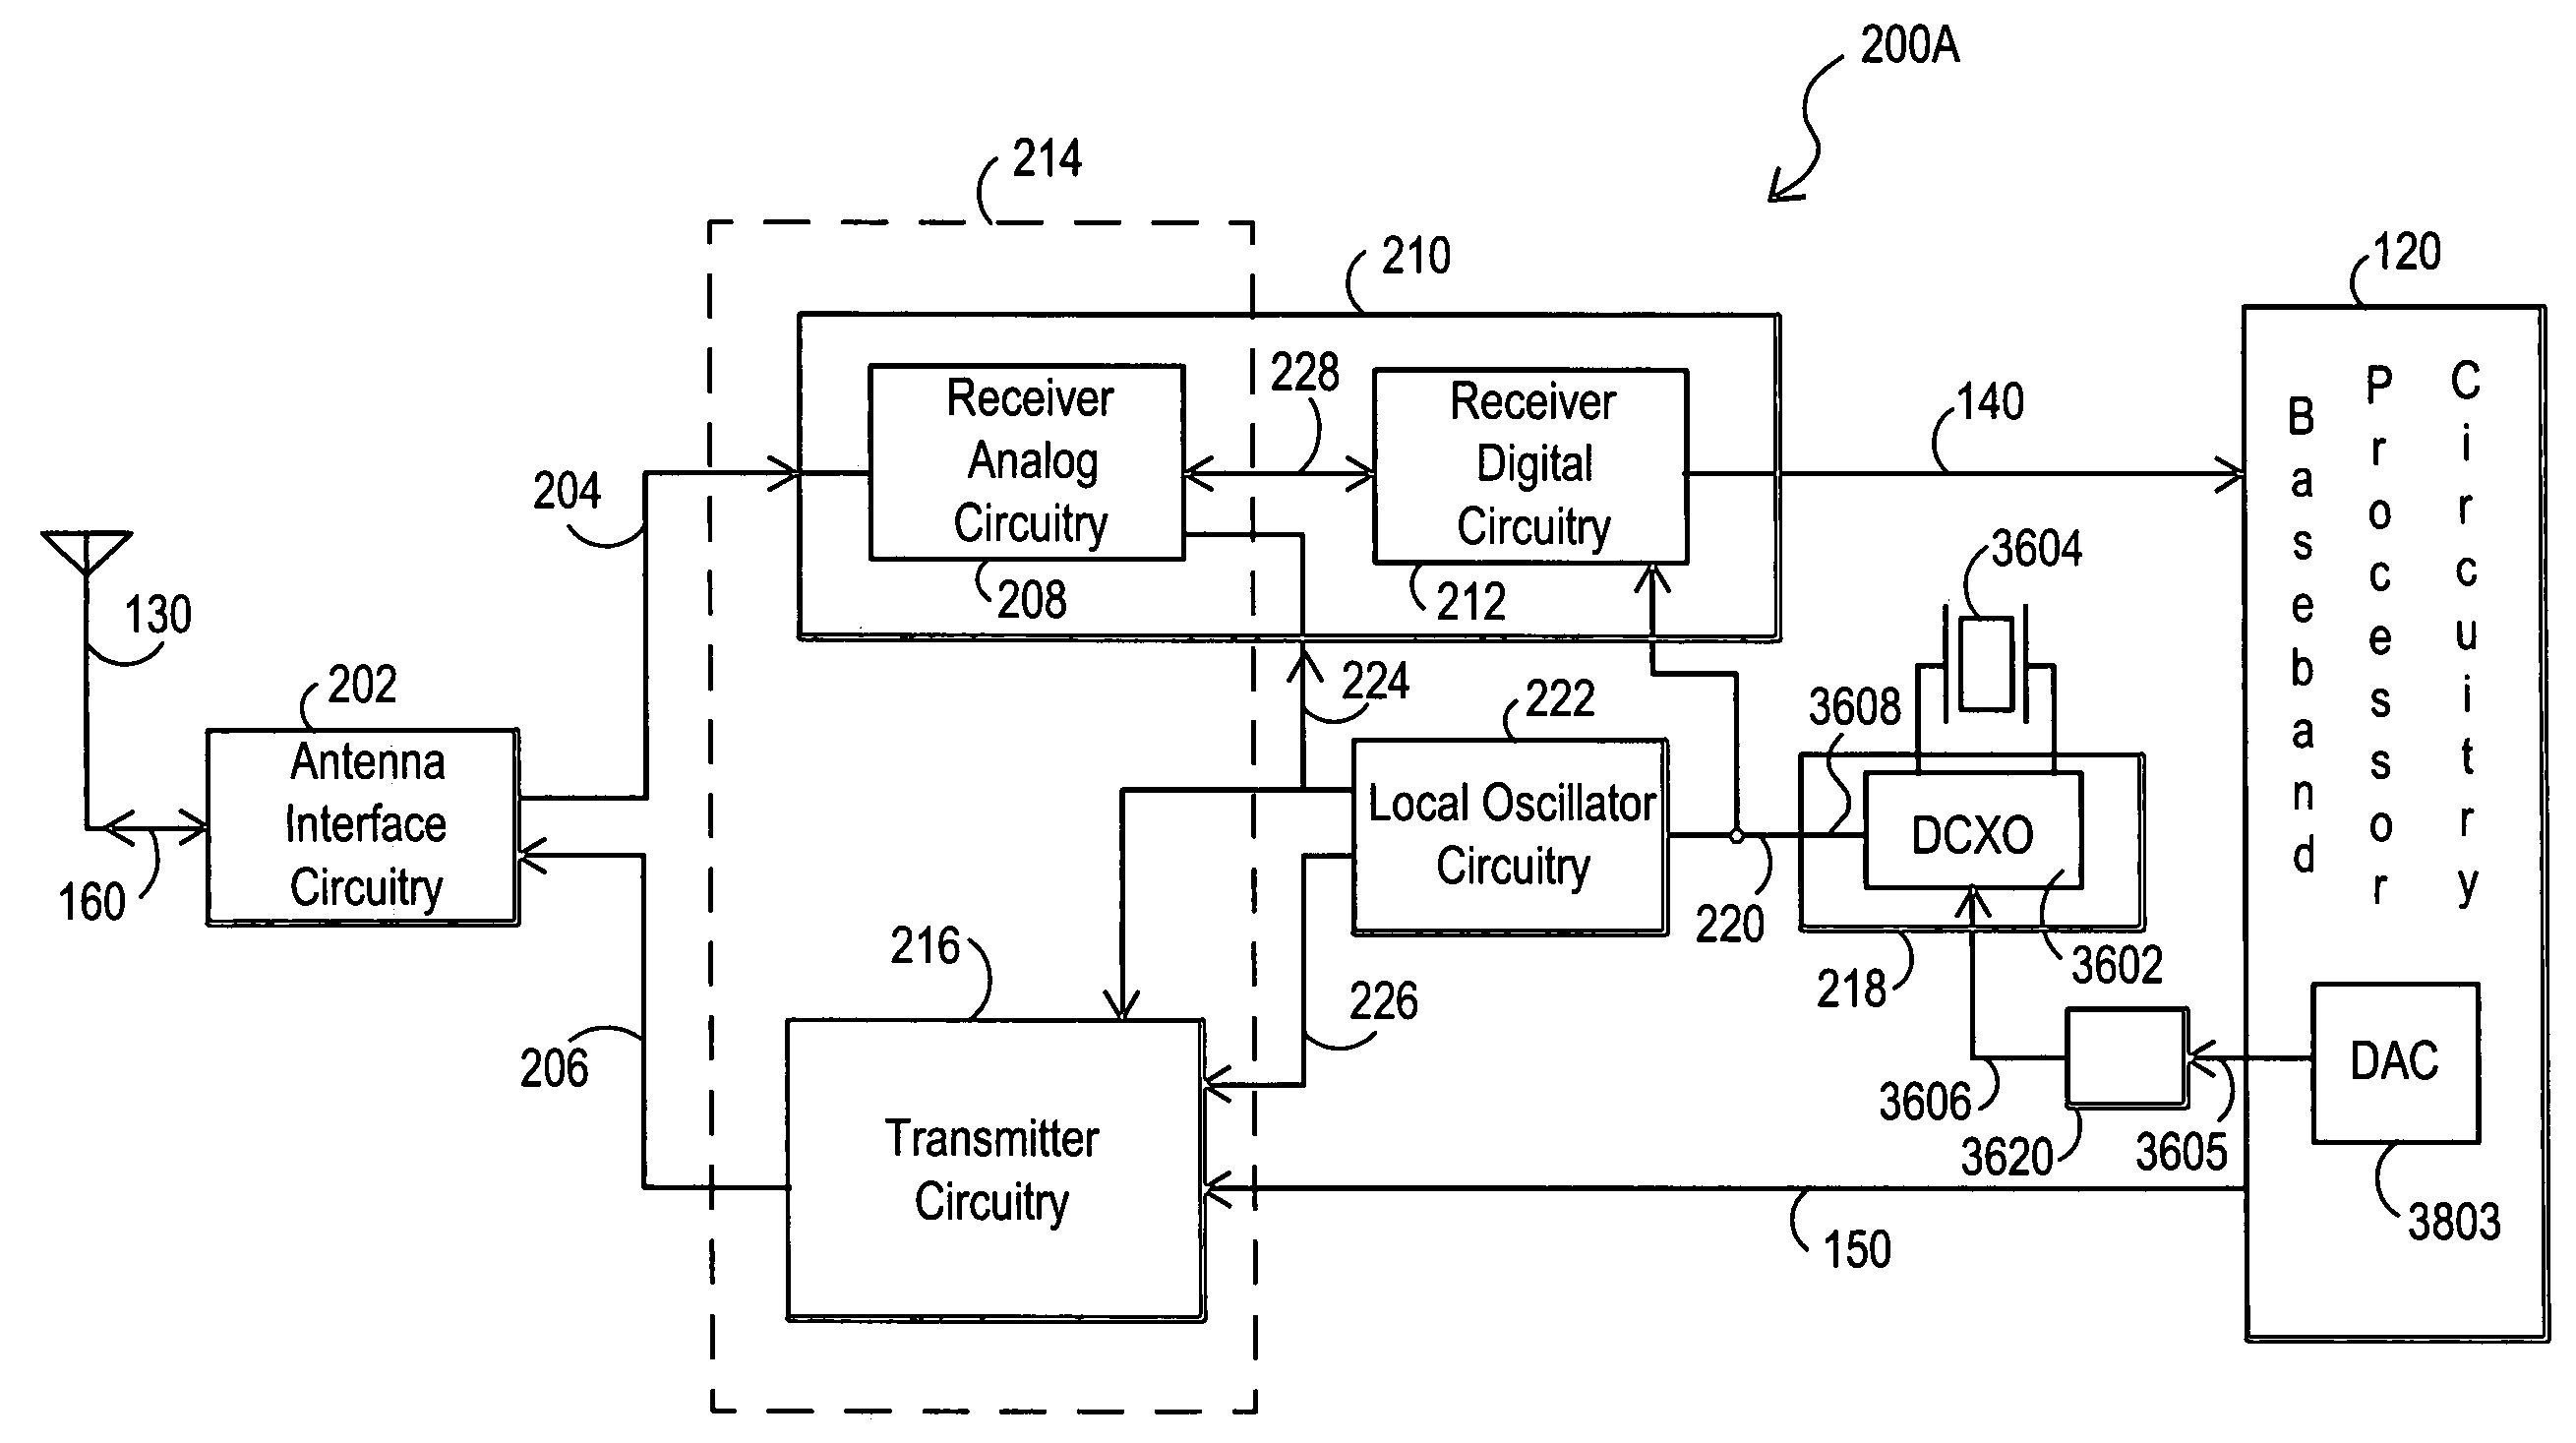 Partitioning of radio-frequency apparatus